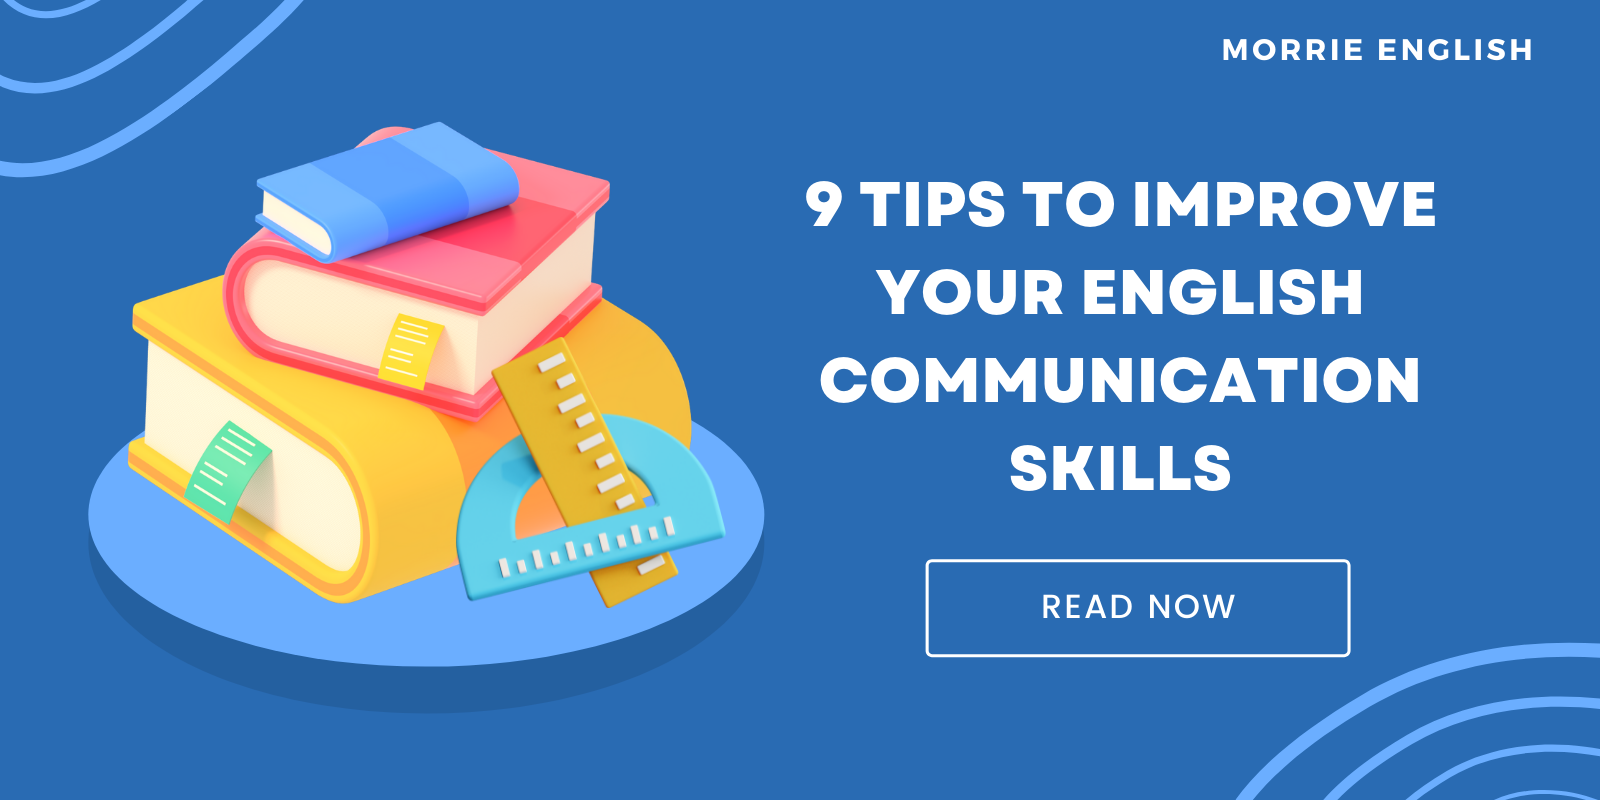 9 Tips to Improve Your English Communication Skills